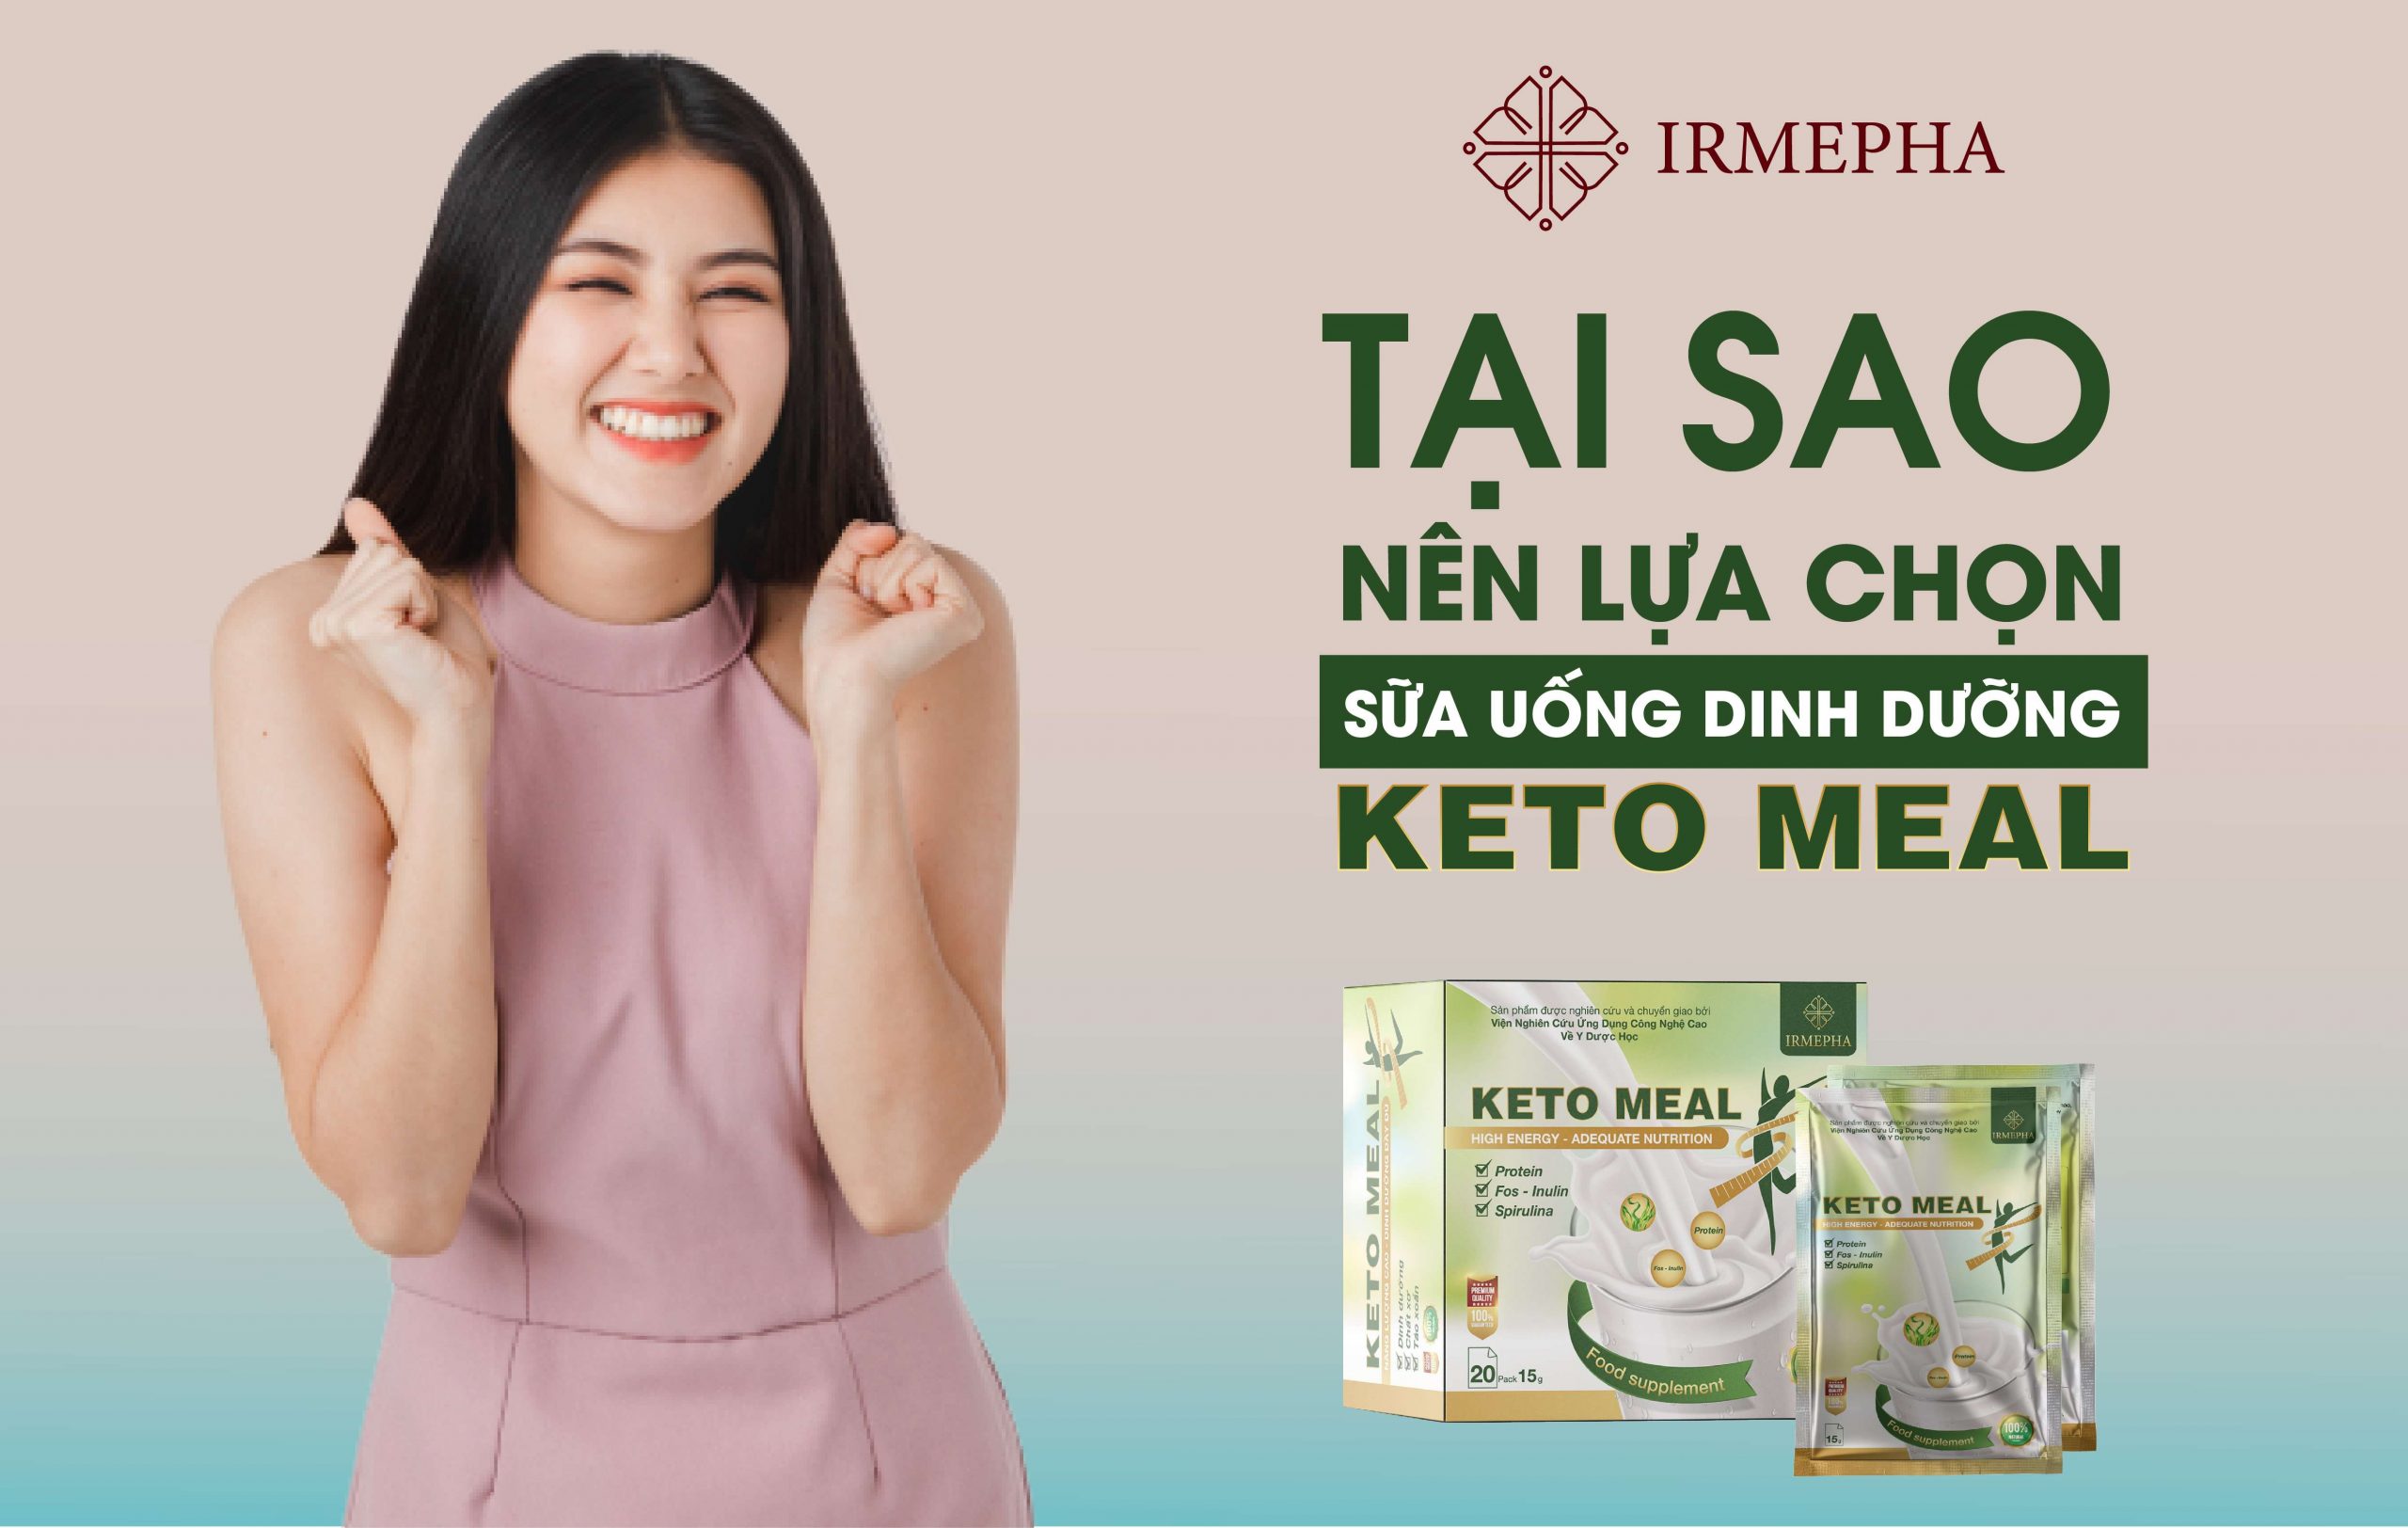 https://irmepha.vn/wp-admin/post.php?post=1064&action=edit